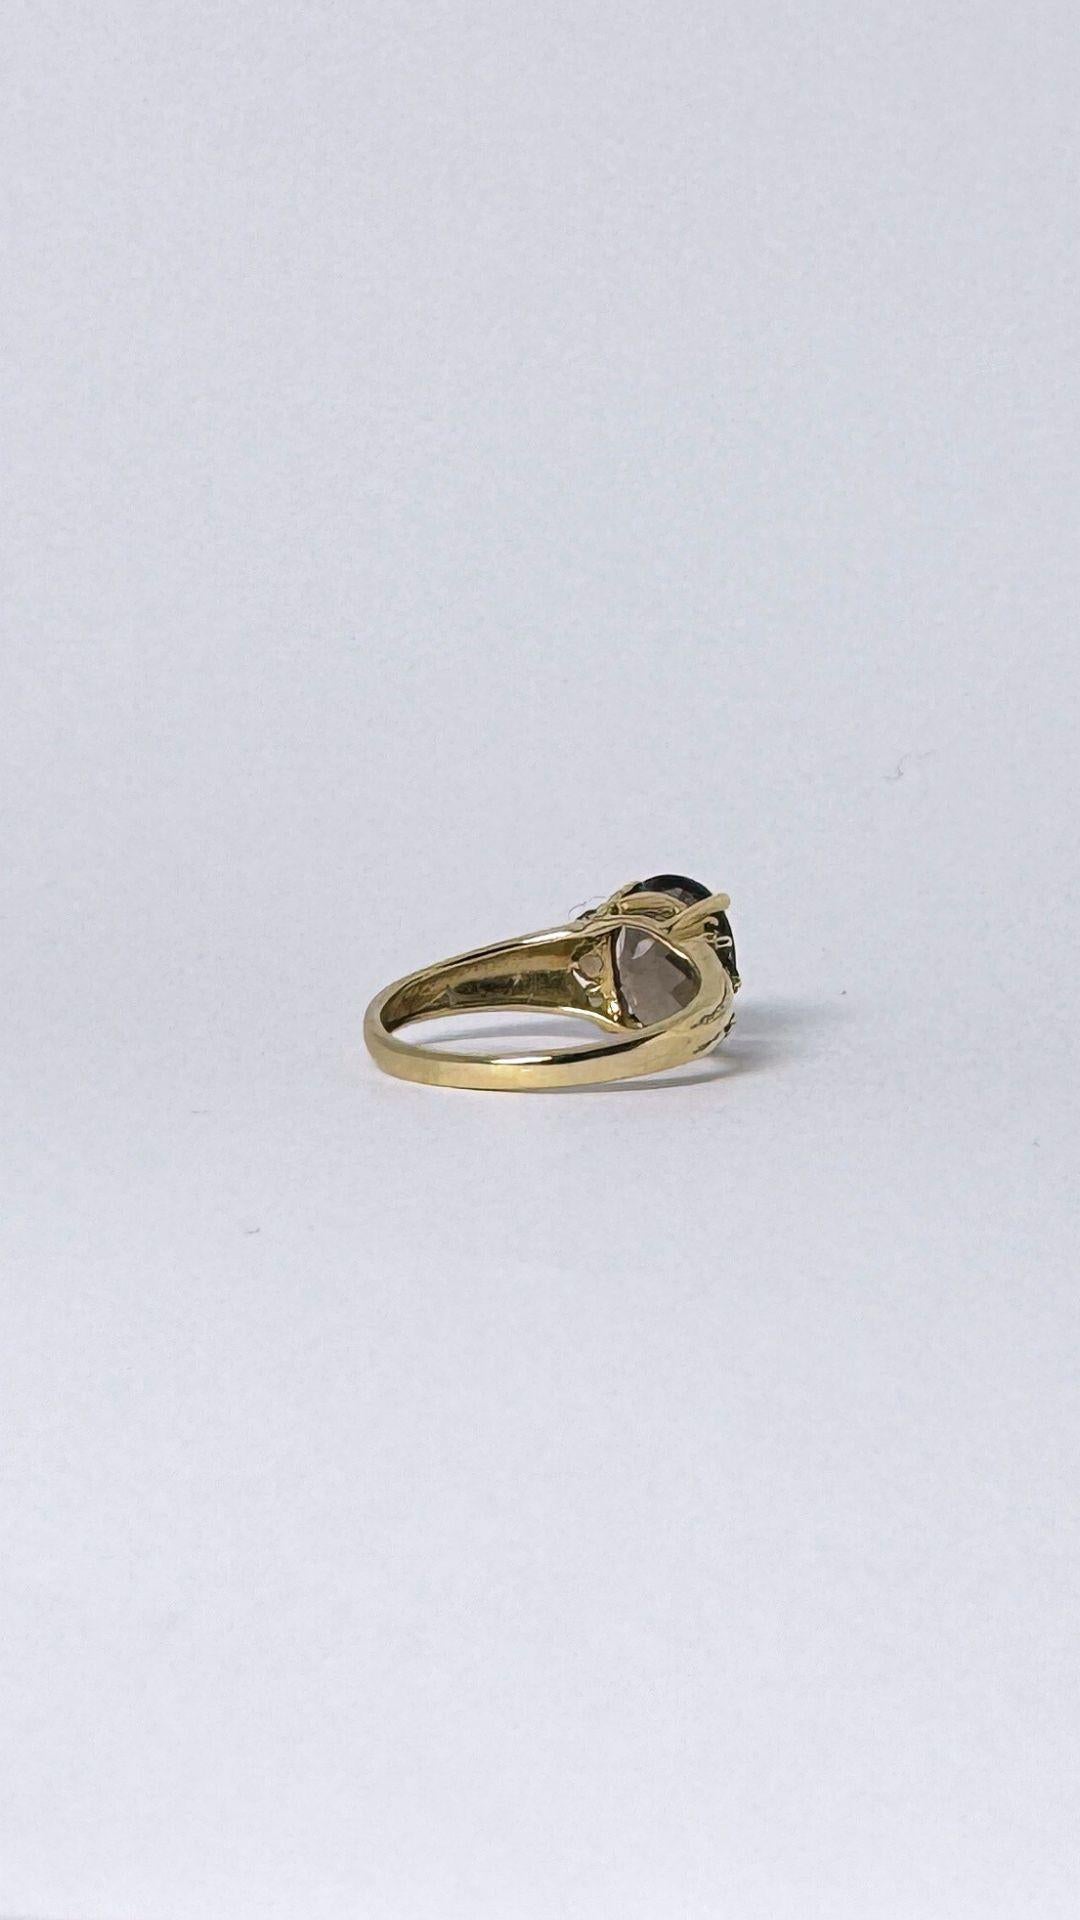 Ring 14 carat gold with smokey quarts  2 carat, surrounded with little quarts  For Sale 2